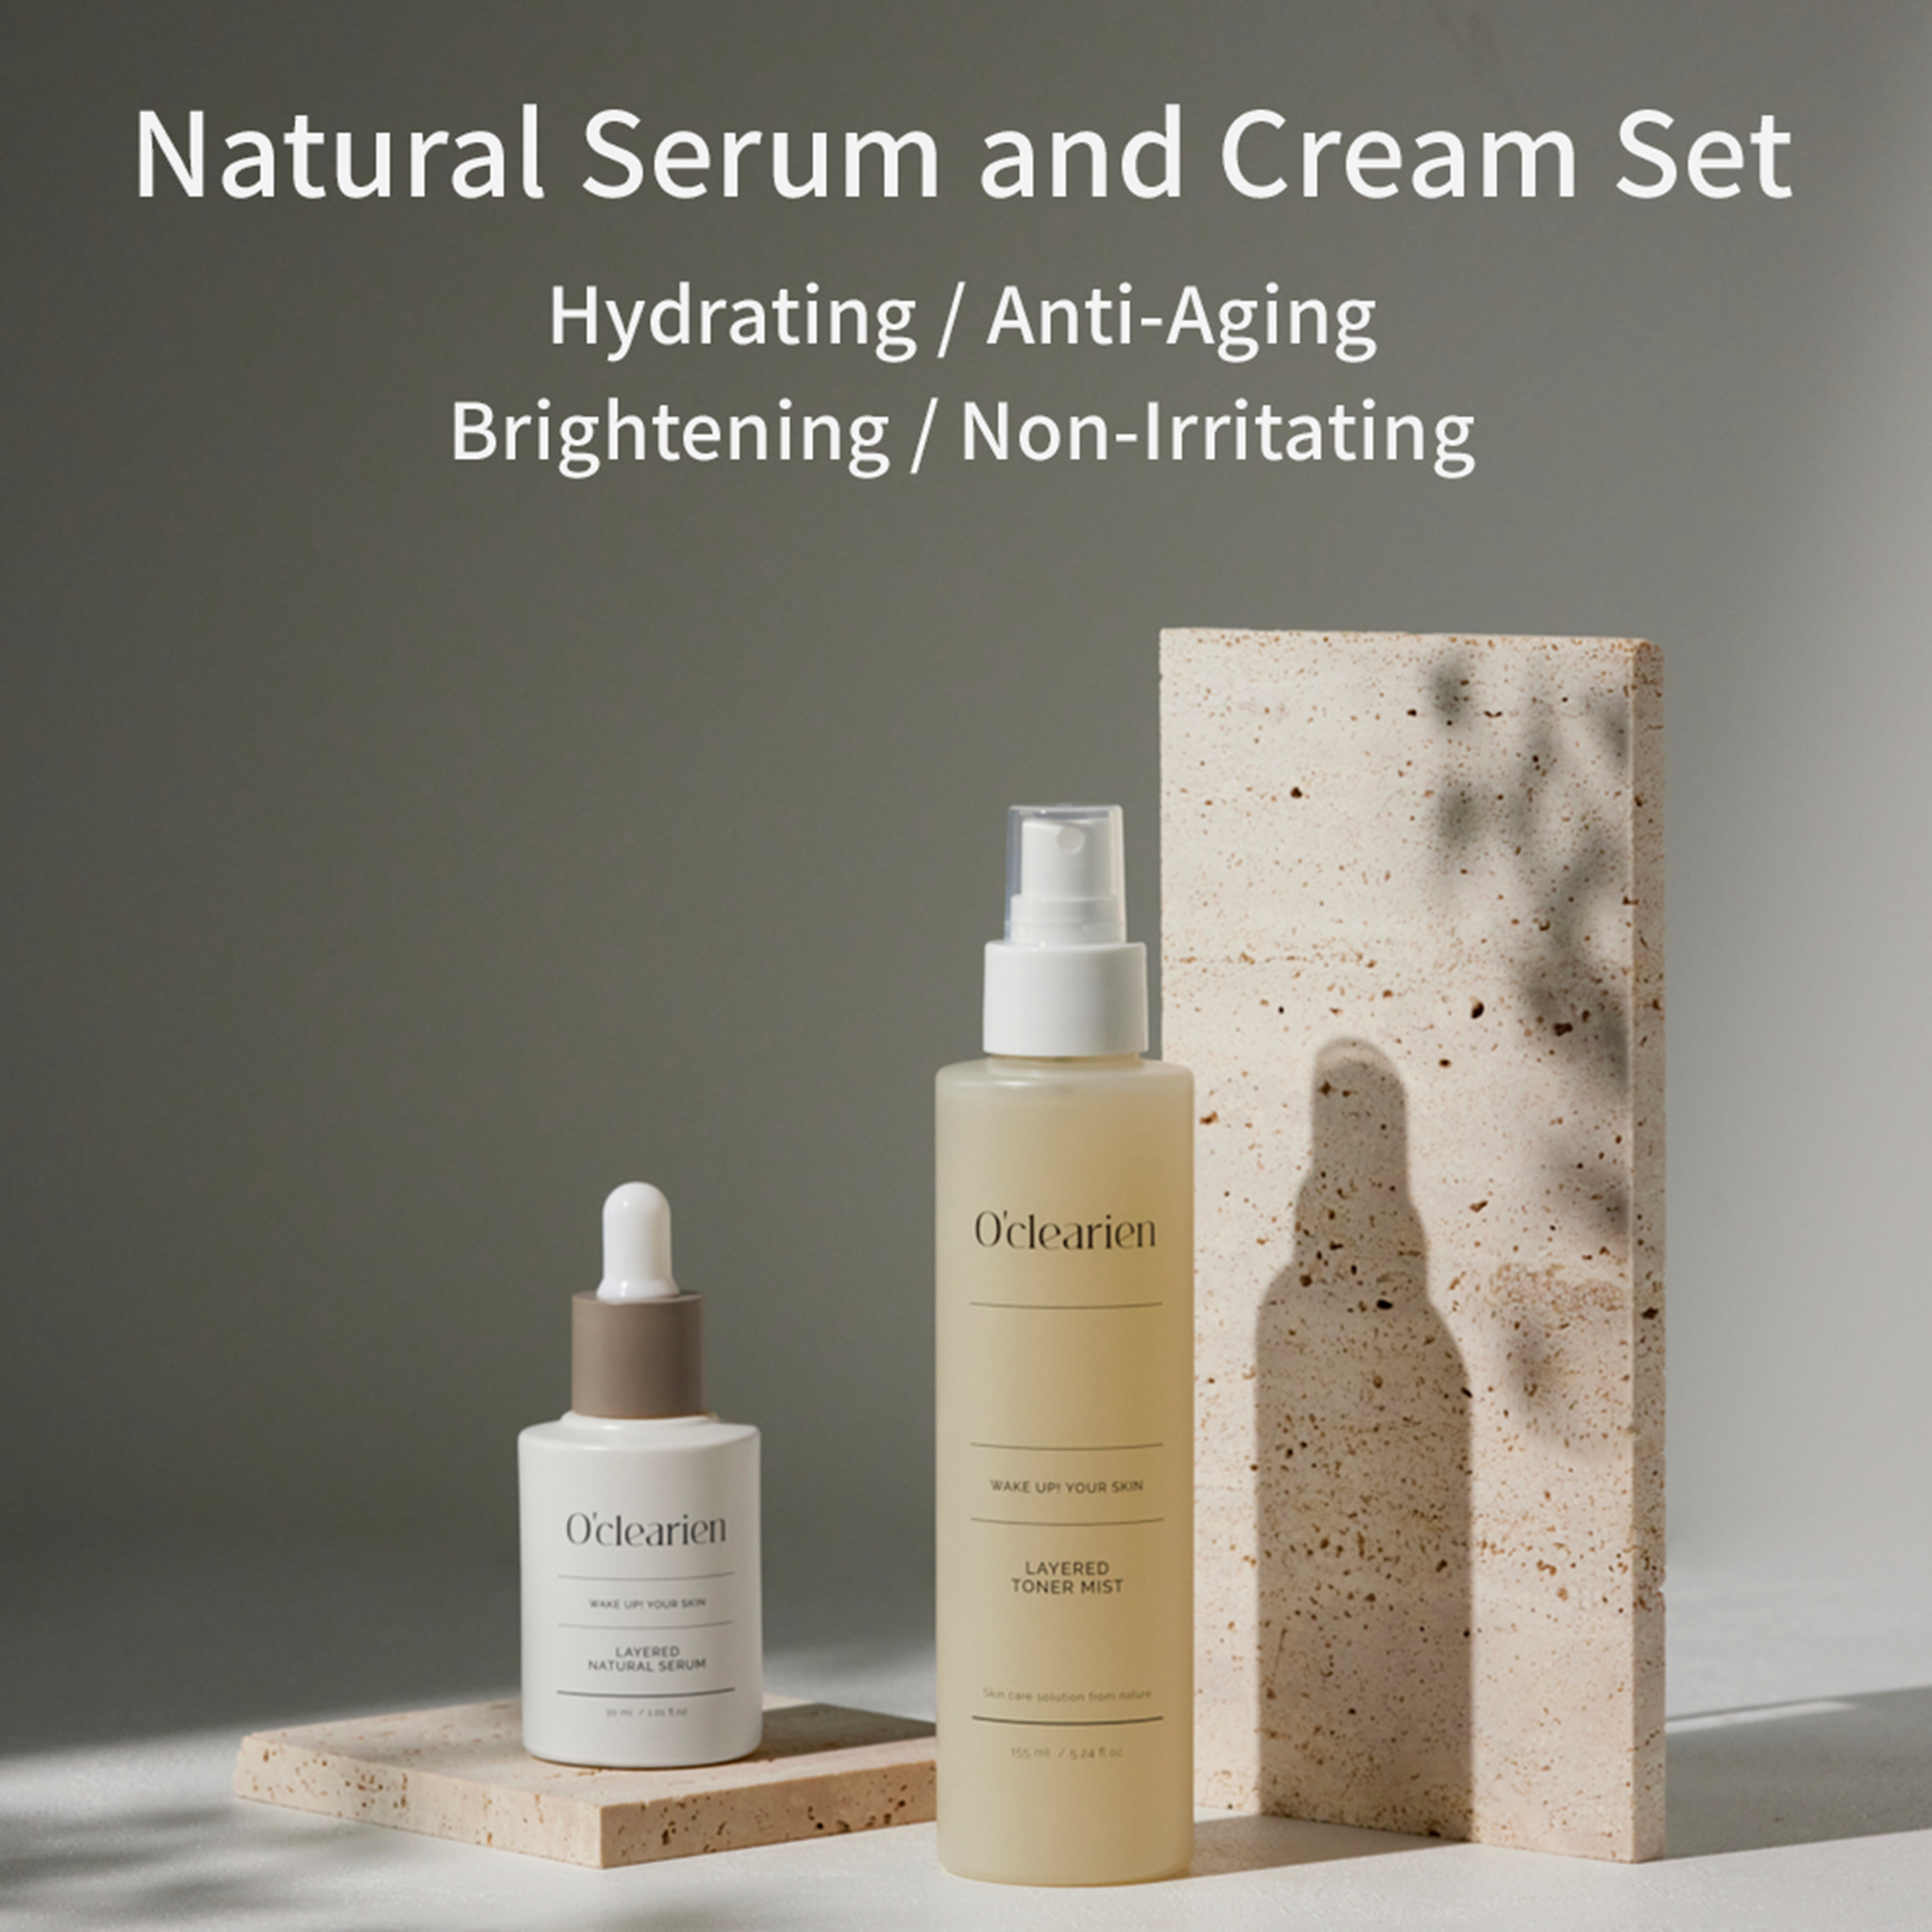 Serum and toner mist are there in front of rocked wall